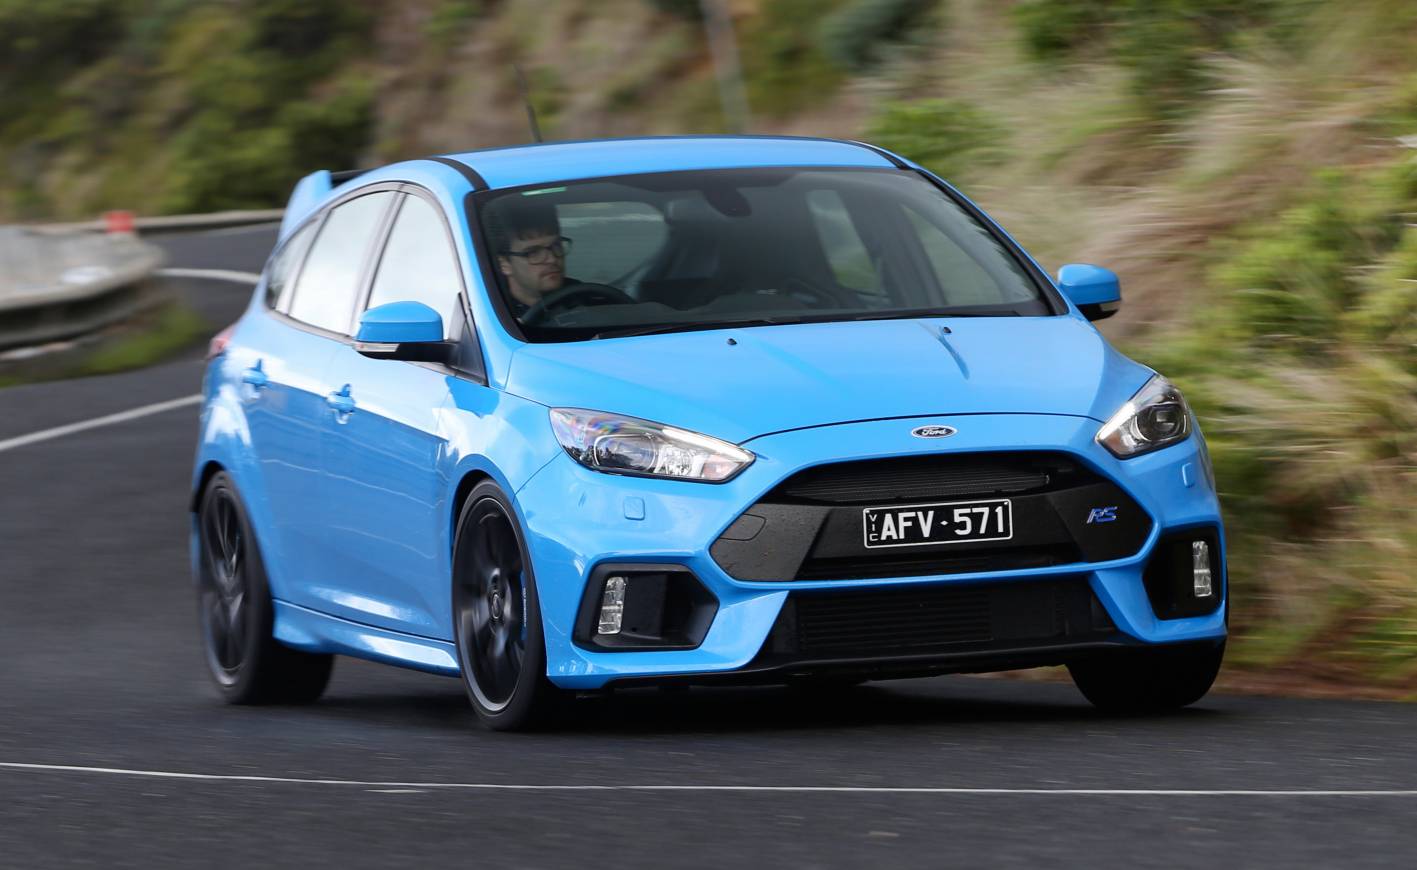 2016 Ford Focus RS now on sale in Australia from $50,990